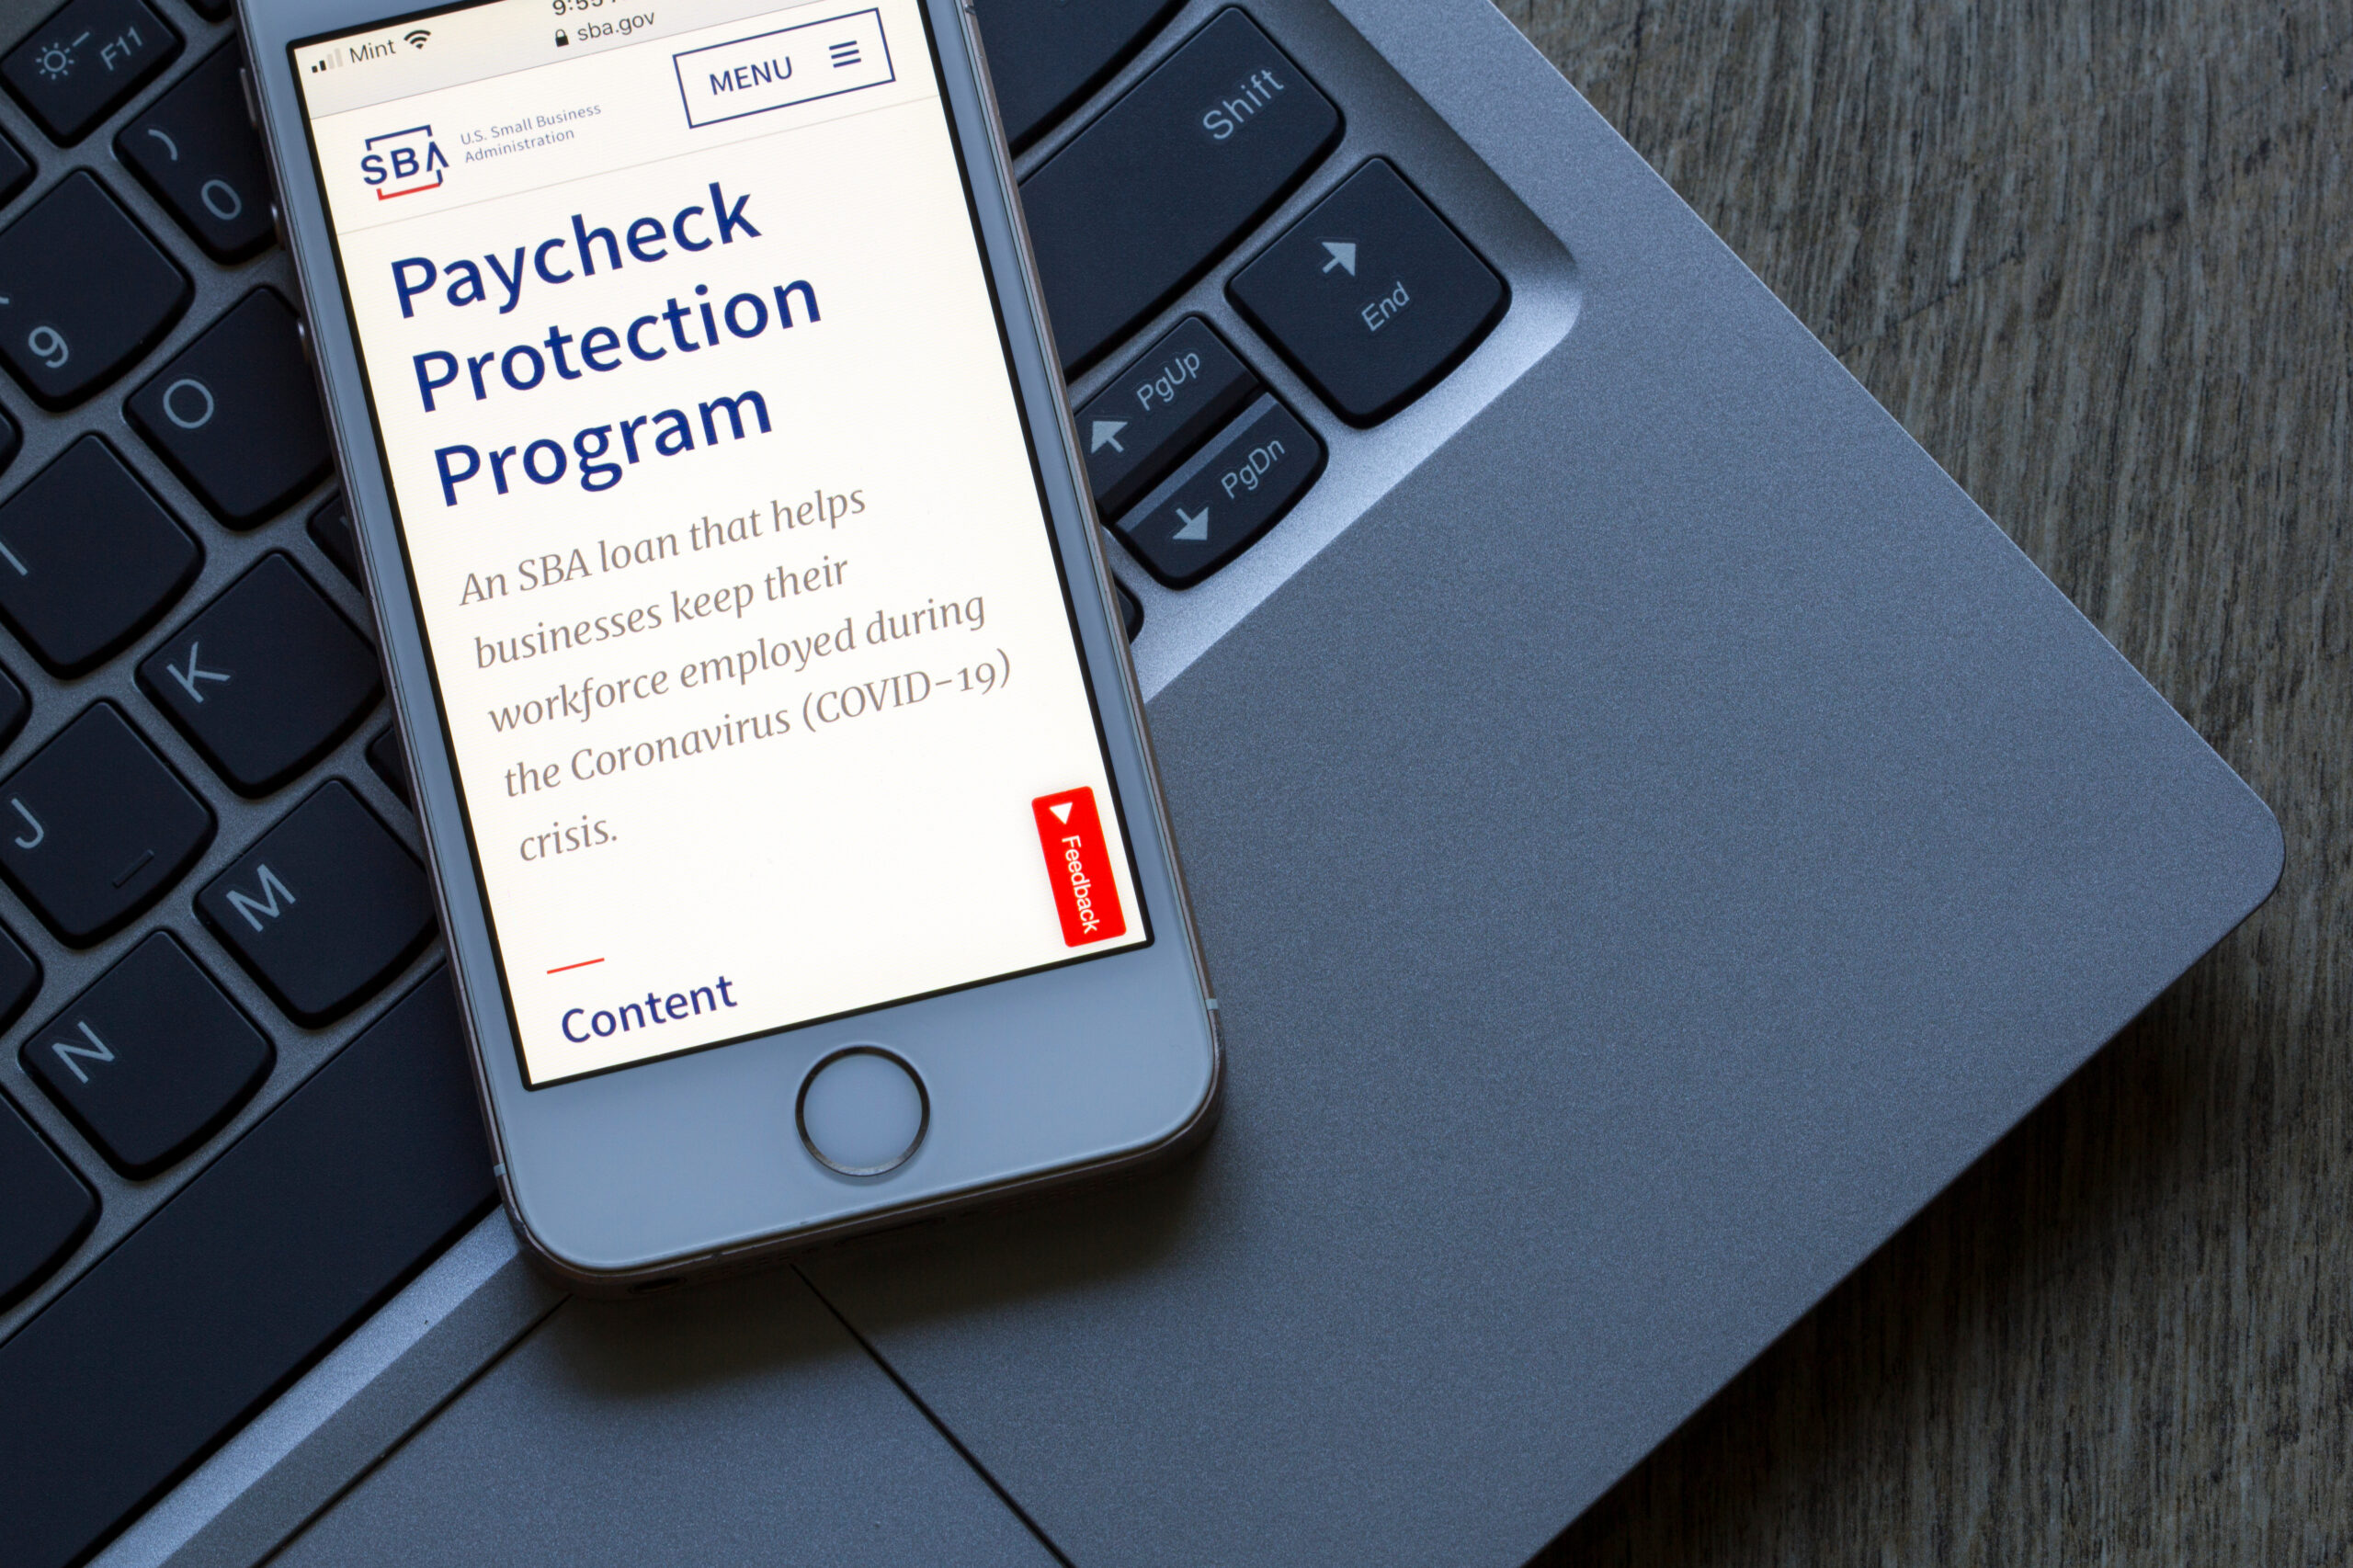 Paycheck Protection Program Information coming from the Small Business Association